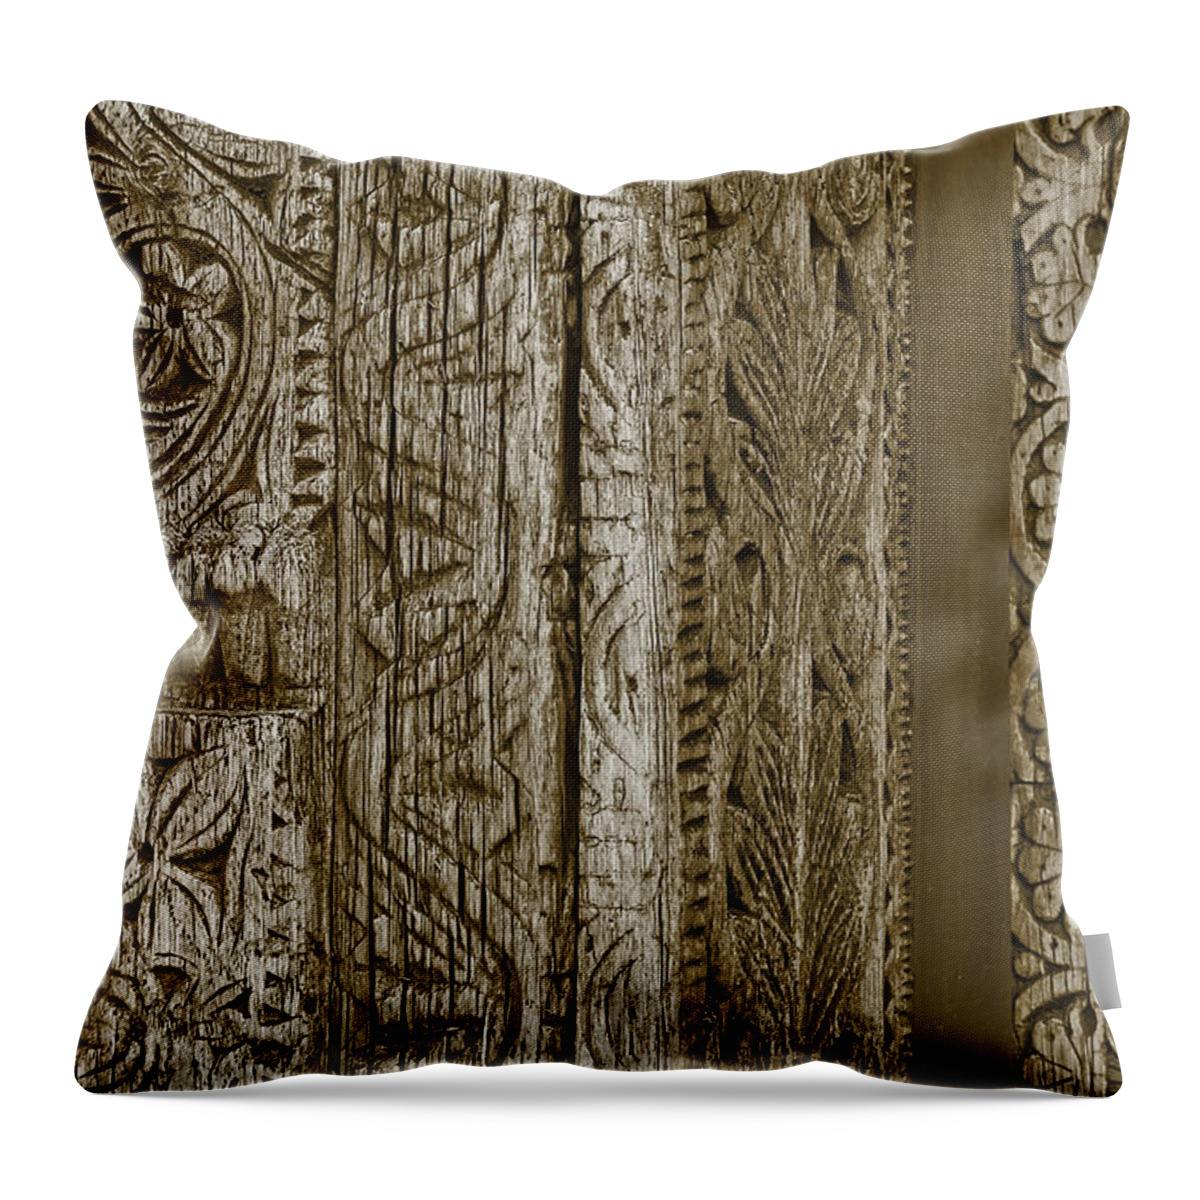 Southwestern Throw Pillow featuring the photograph Carving - 2 by Nikolyn McDonald